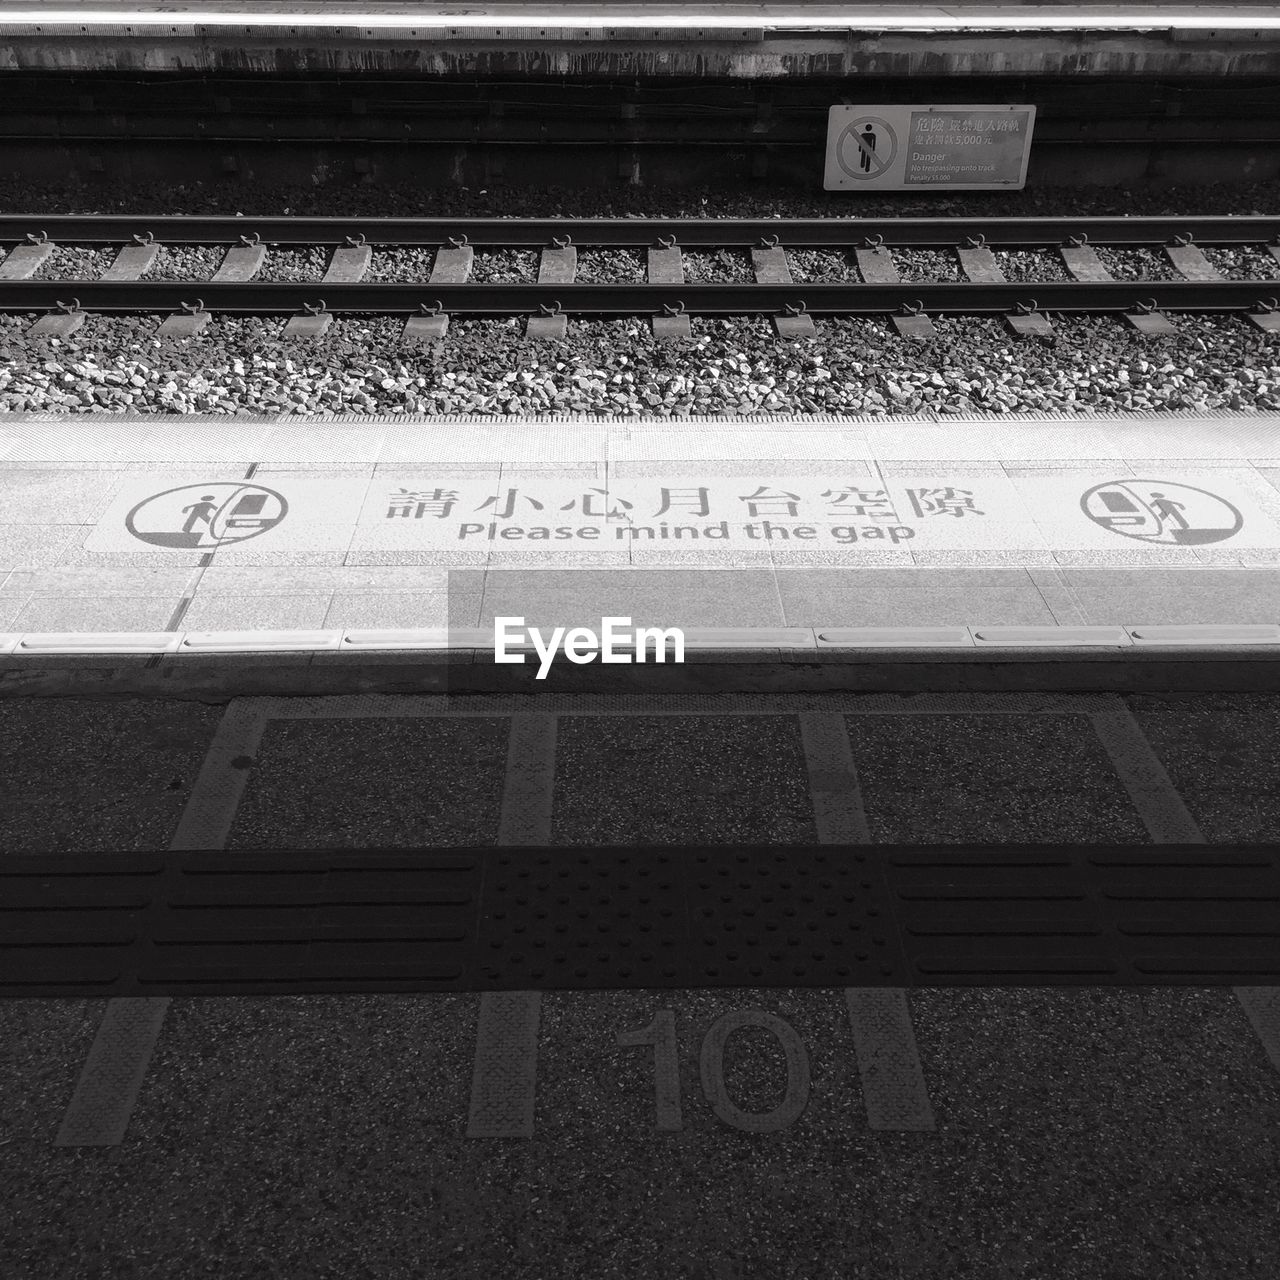 High angle view of text on railroad station platform